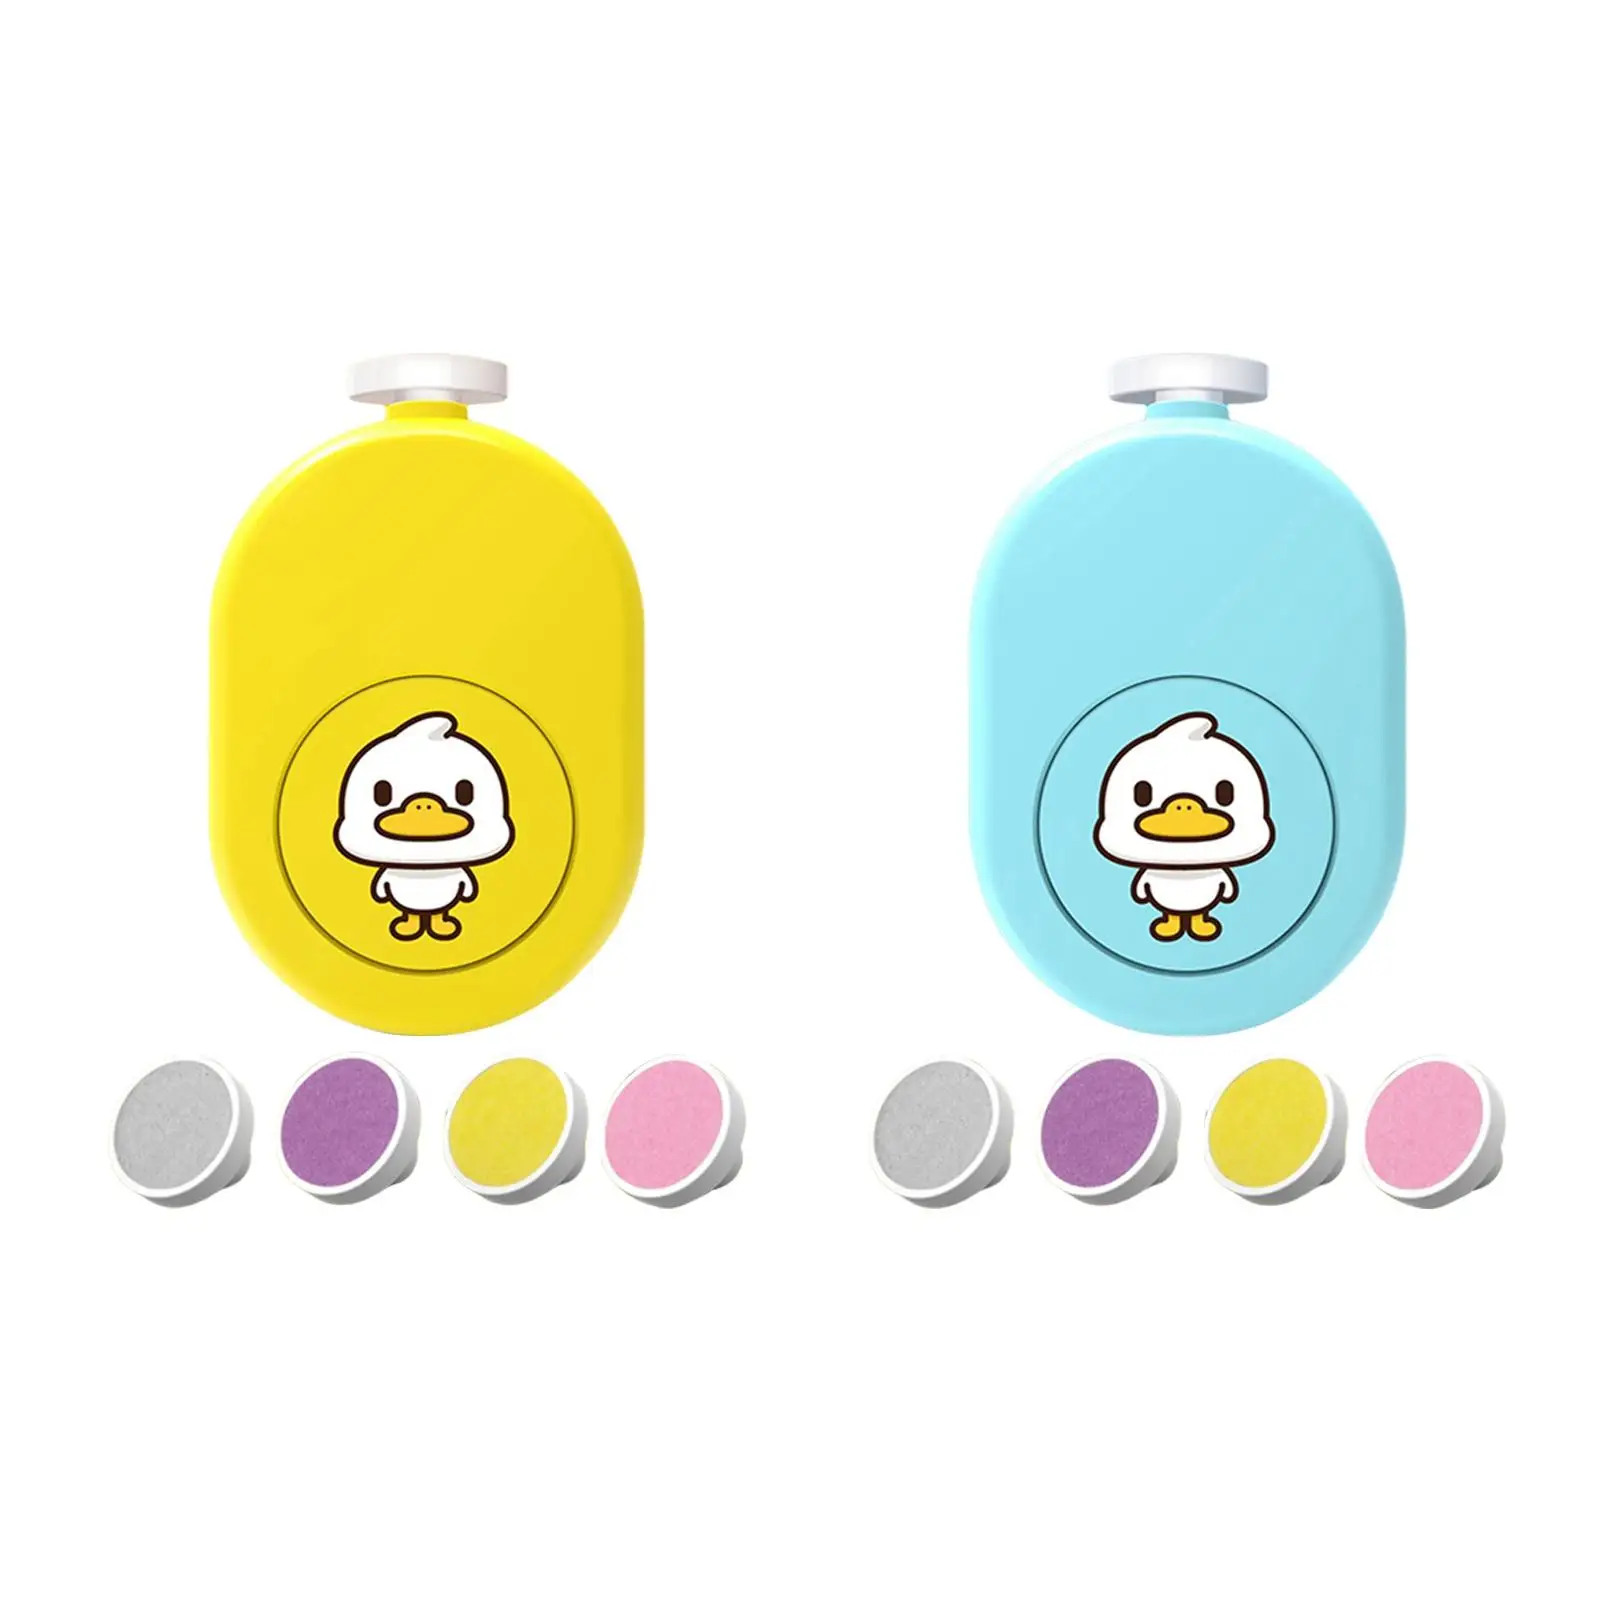 Cute Electric Baby Manicure Set Nail Fingernails Polishing Baby Nail Grooming Kit Nail Polisher for Infant Adults Kids